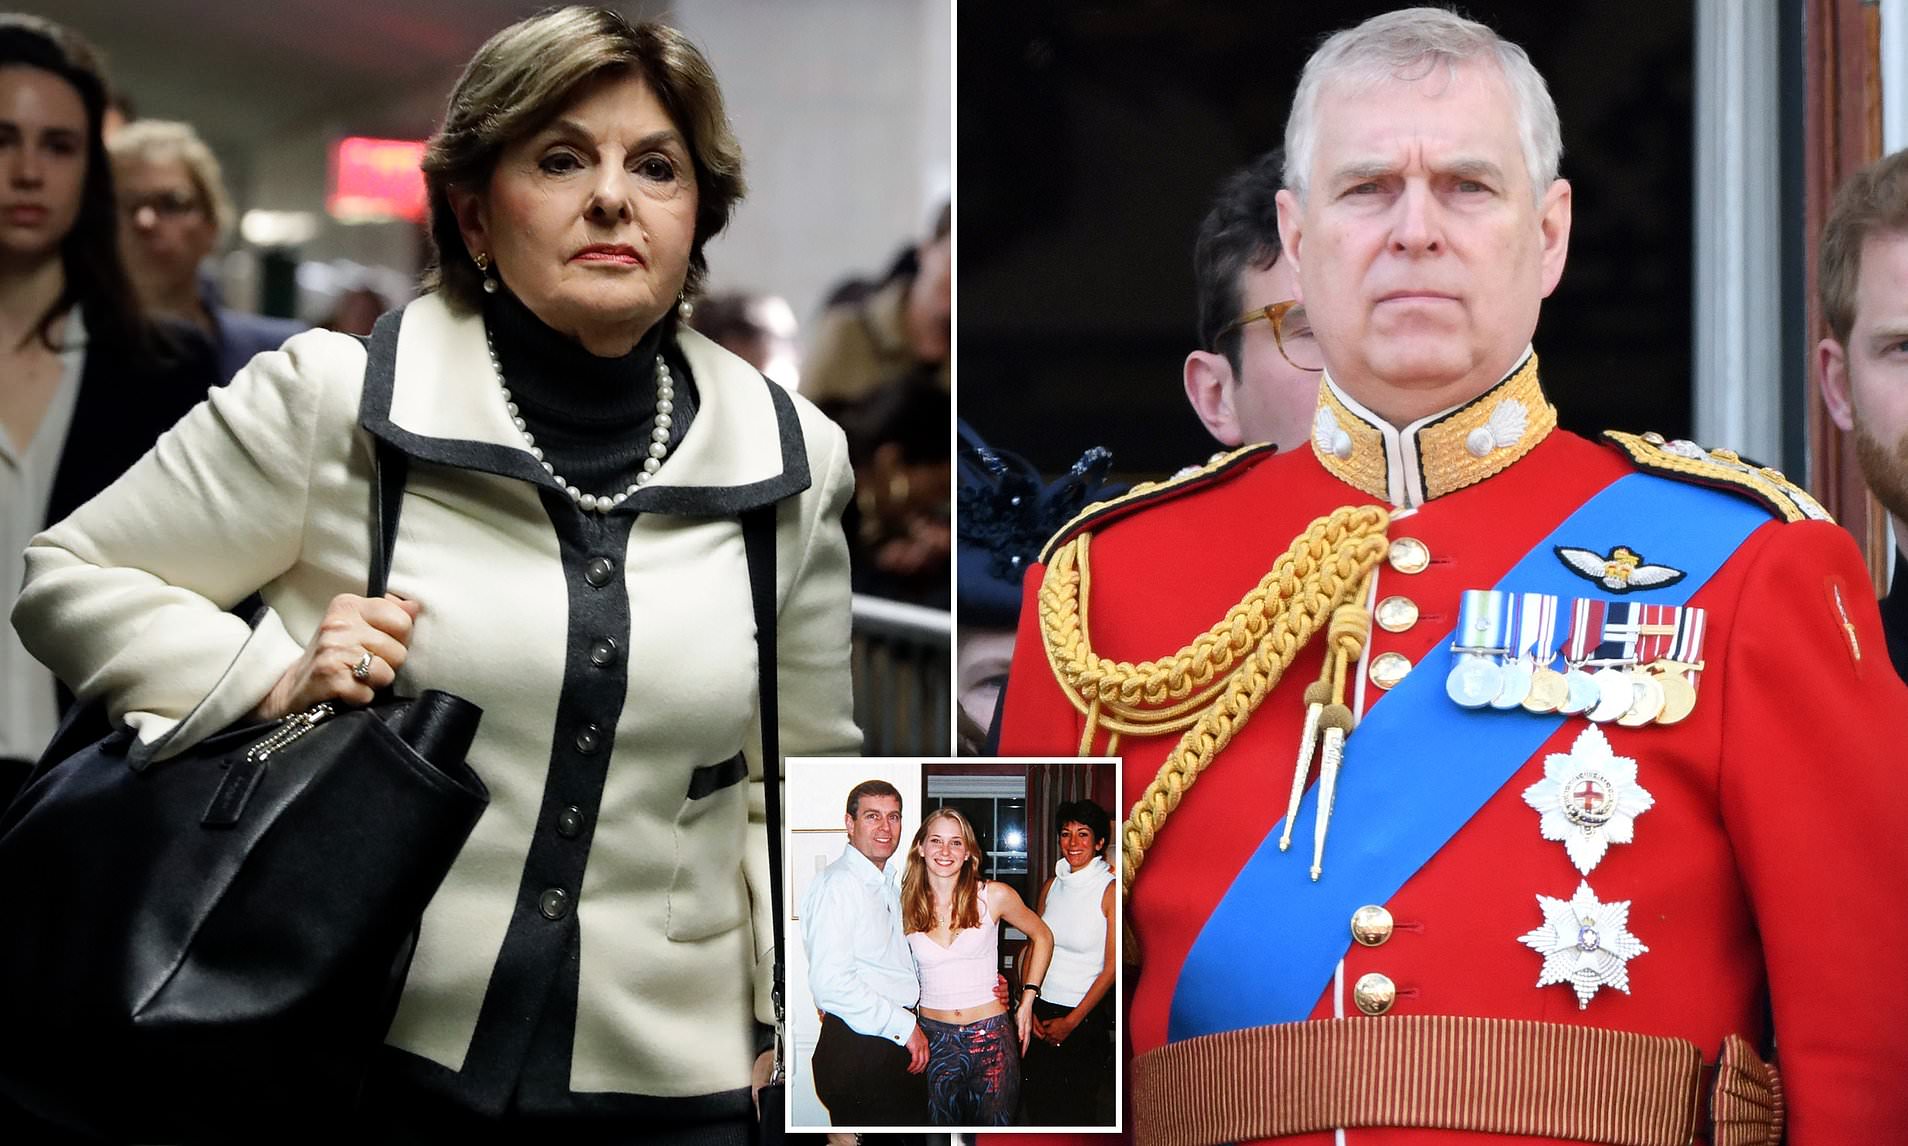 Crowning crime connoisseurs, Netflix is about to spill tea on Prince Andrew’s royal scandal. Will the Duke waltz his way out, or will this explosive docu-drama lead to handcuffs?